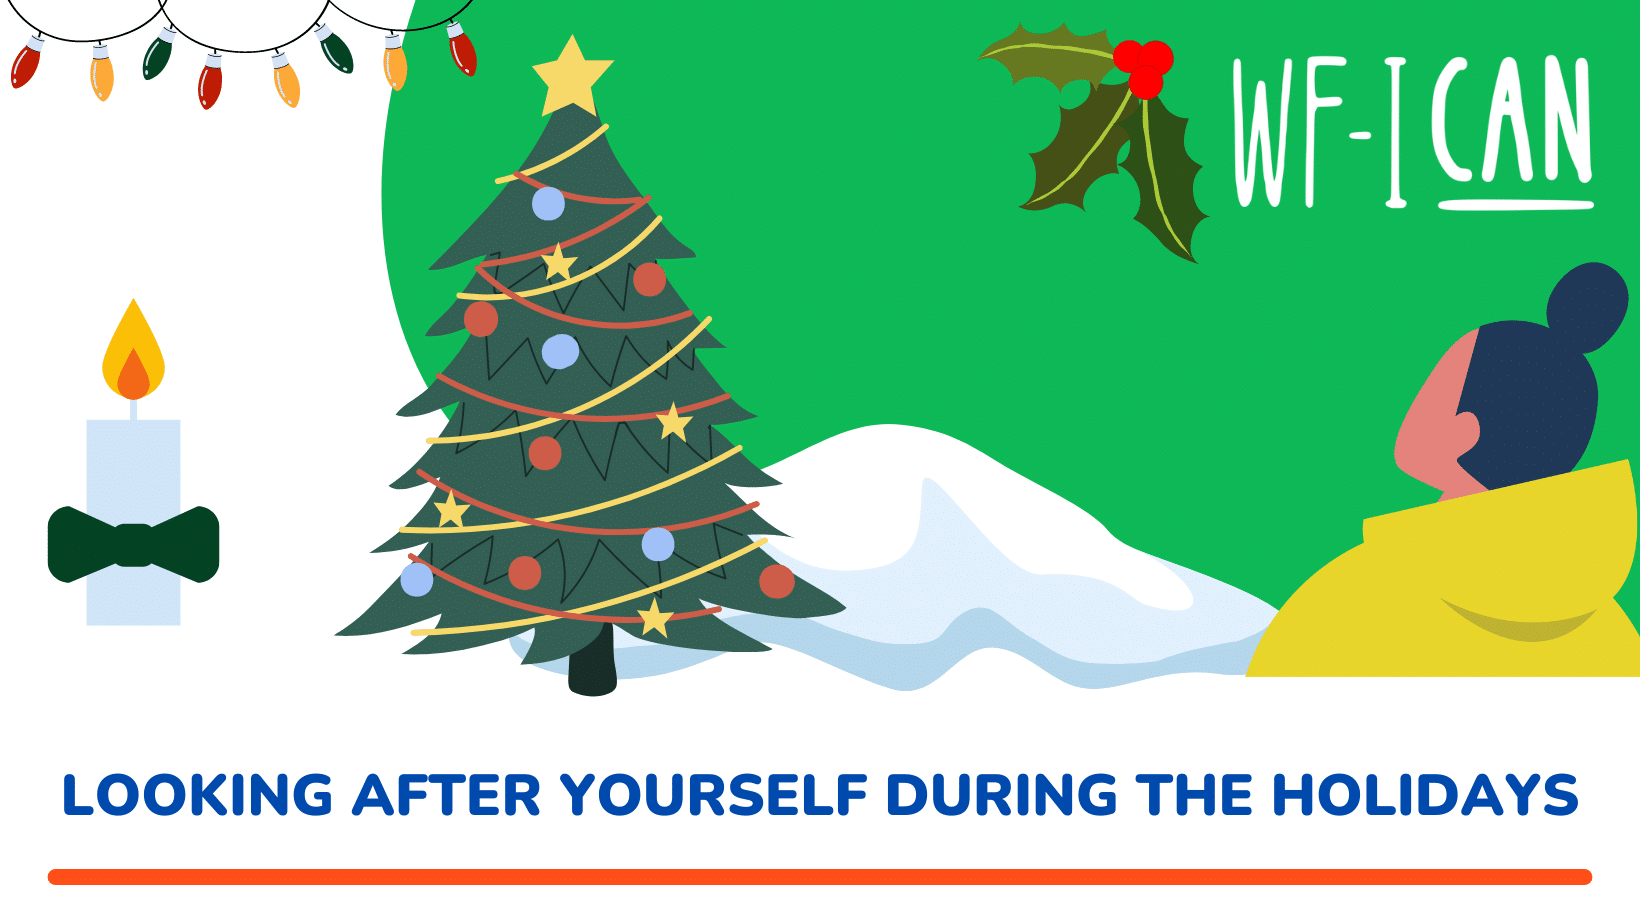  Looking After Yourself During the Holidays Graphic